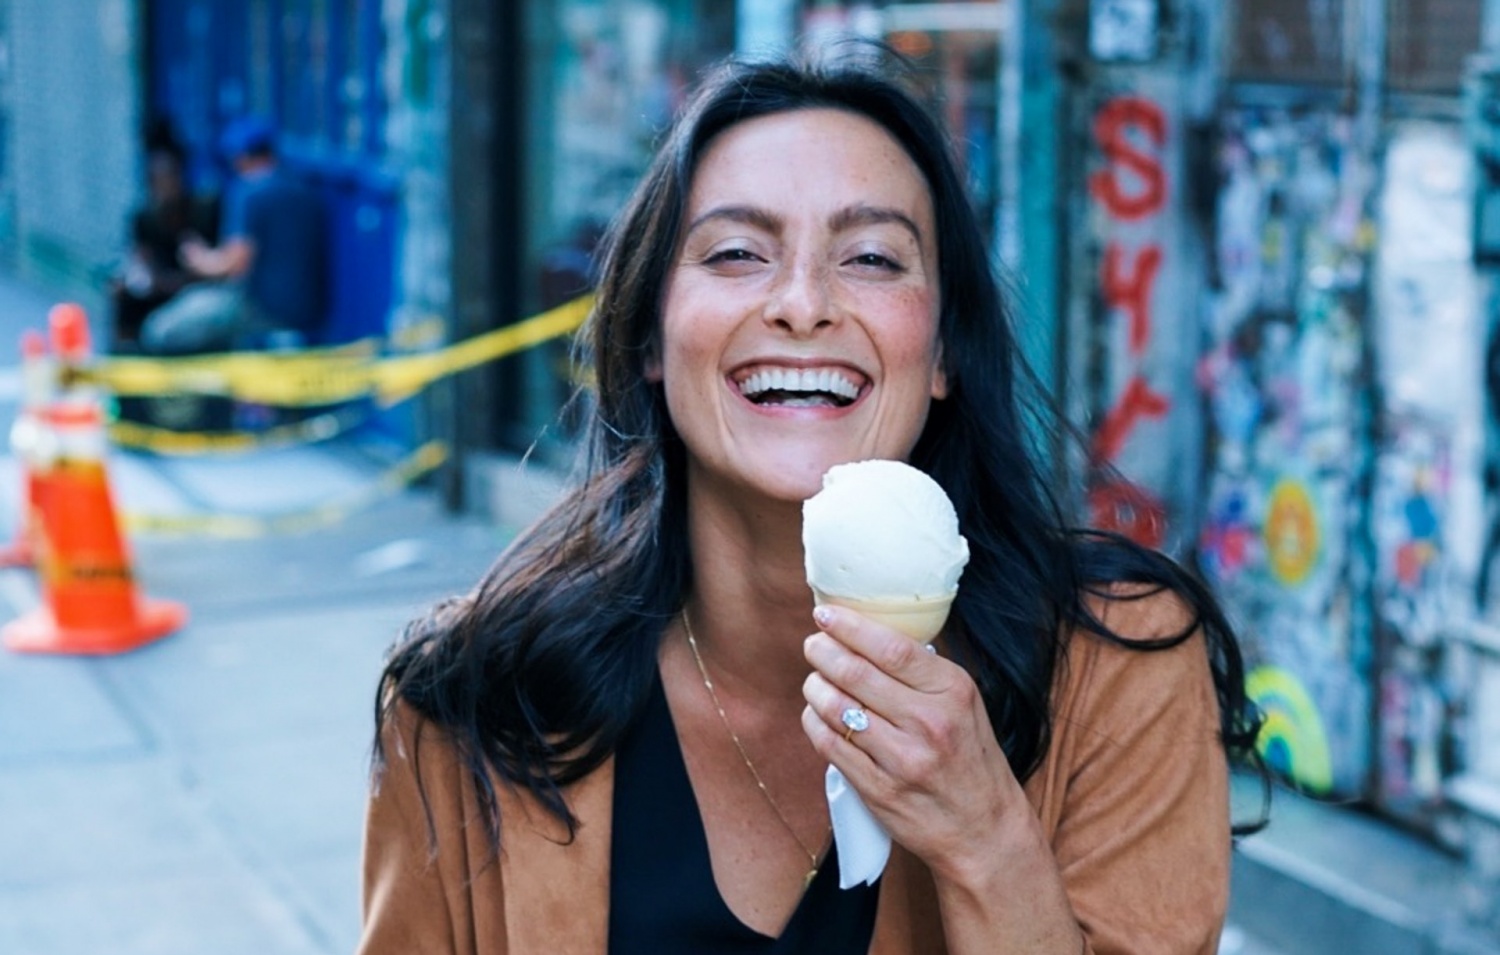 Does Eating Ice Cream Help Boost Mental Health?